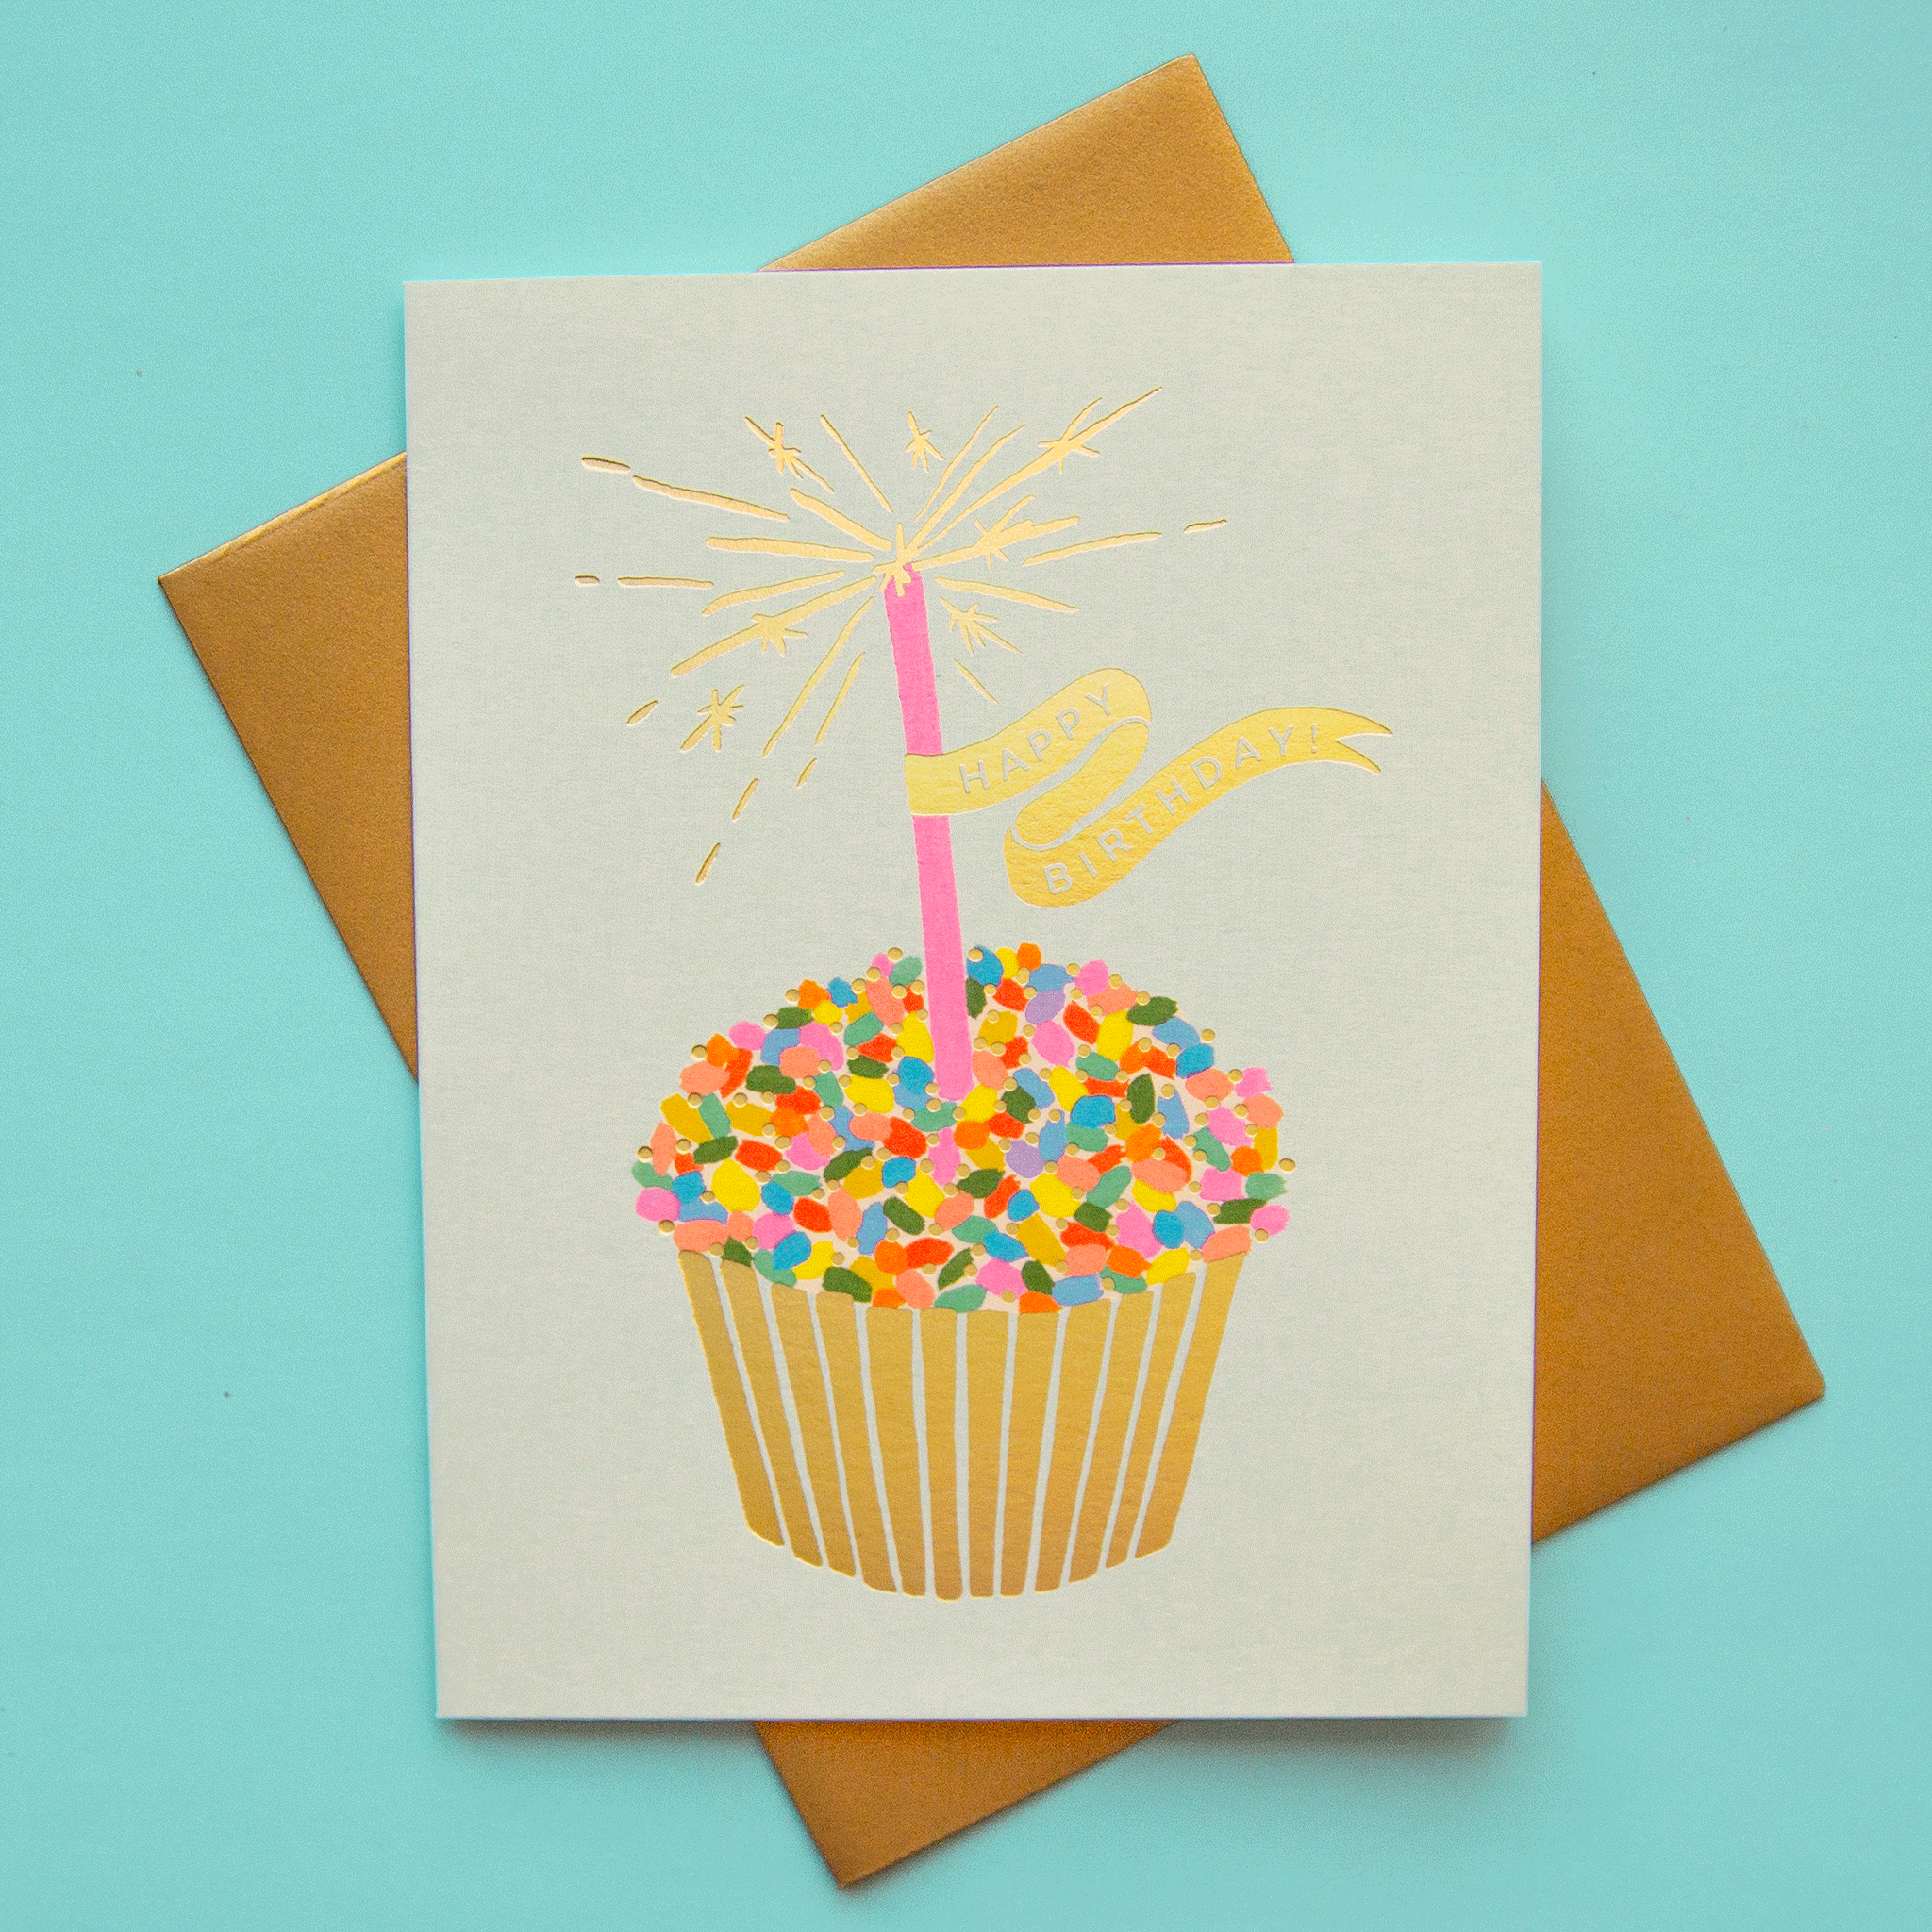 A cupcake birthday card with brown envelope - rainbow cupcake, with sparkling candle print, happy birthday text.A cupcake birthday card with brown envelope - rainbow cupcake, with sparkling candle print, happy birthday text.